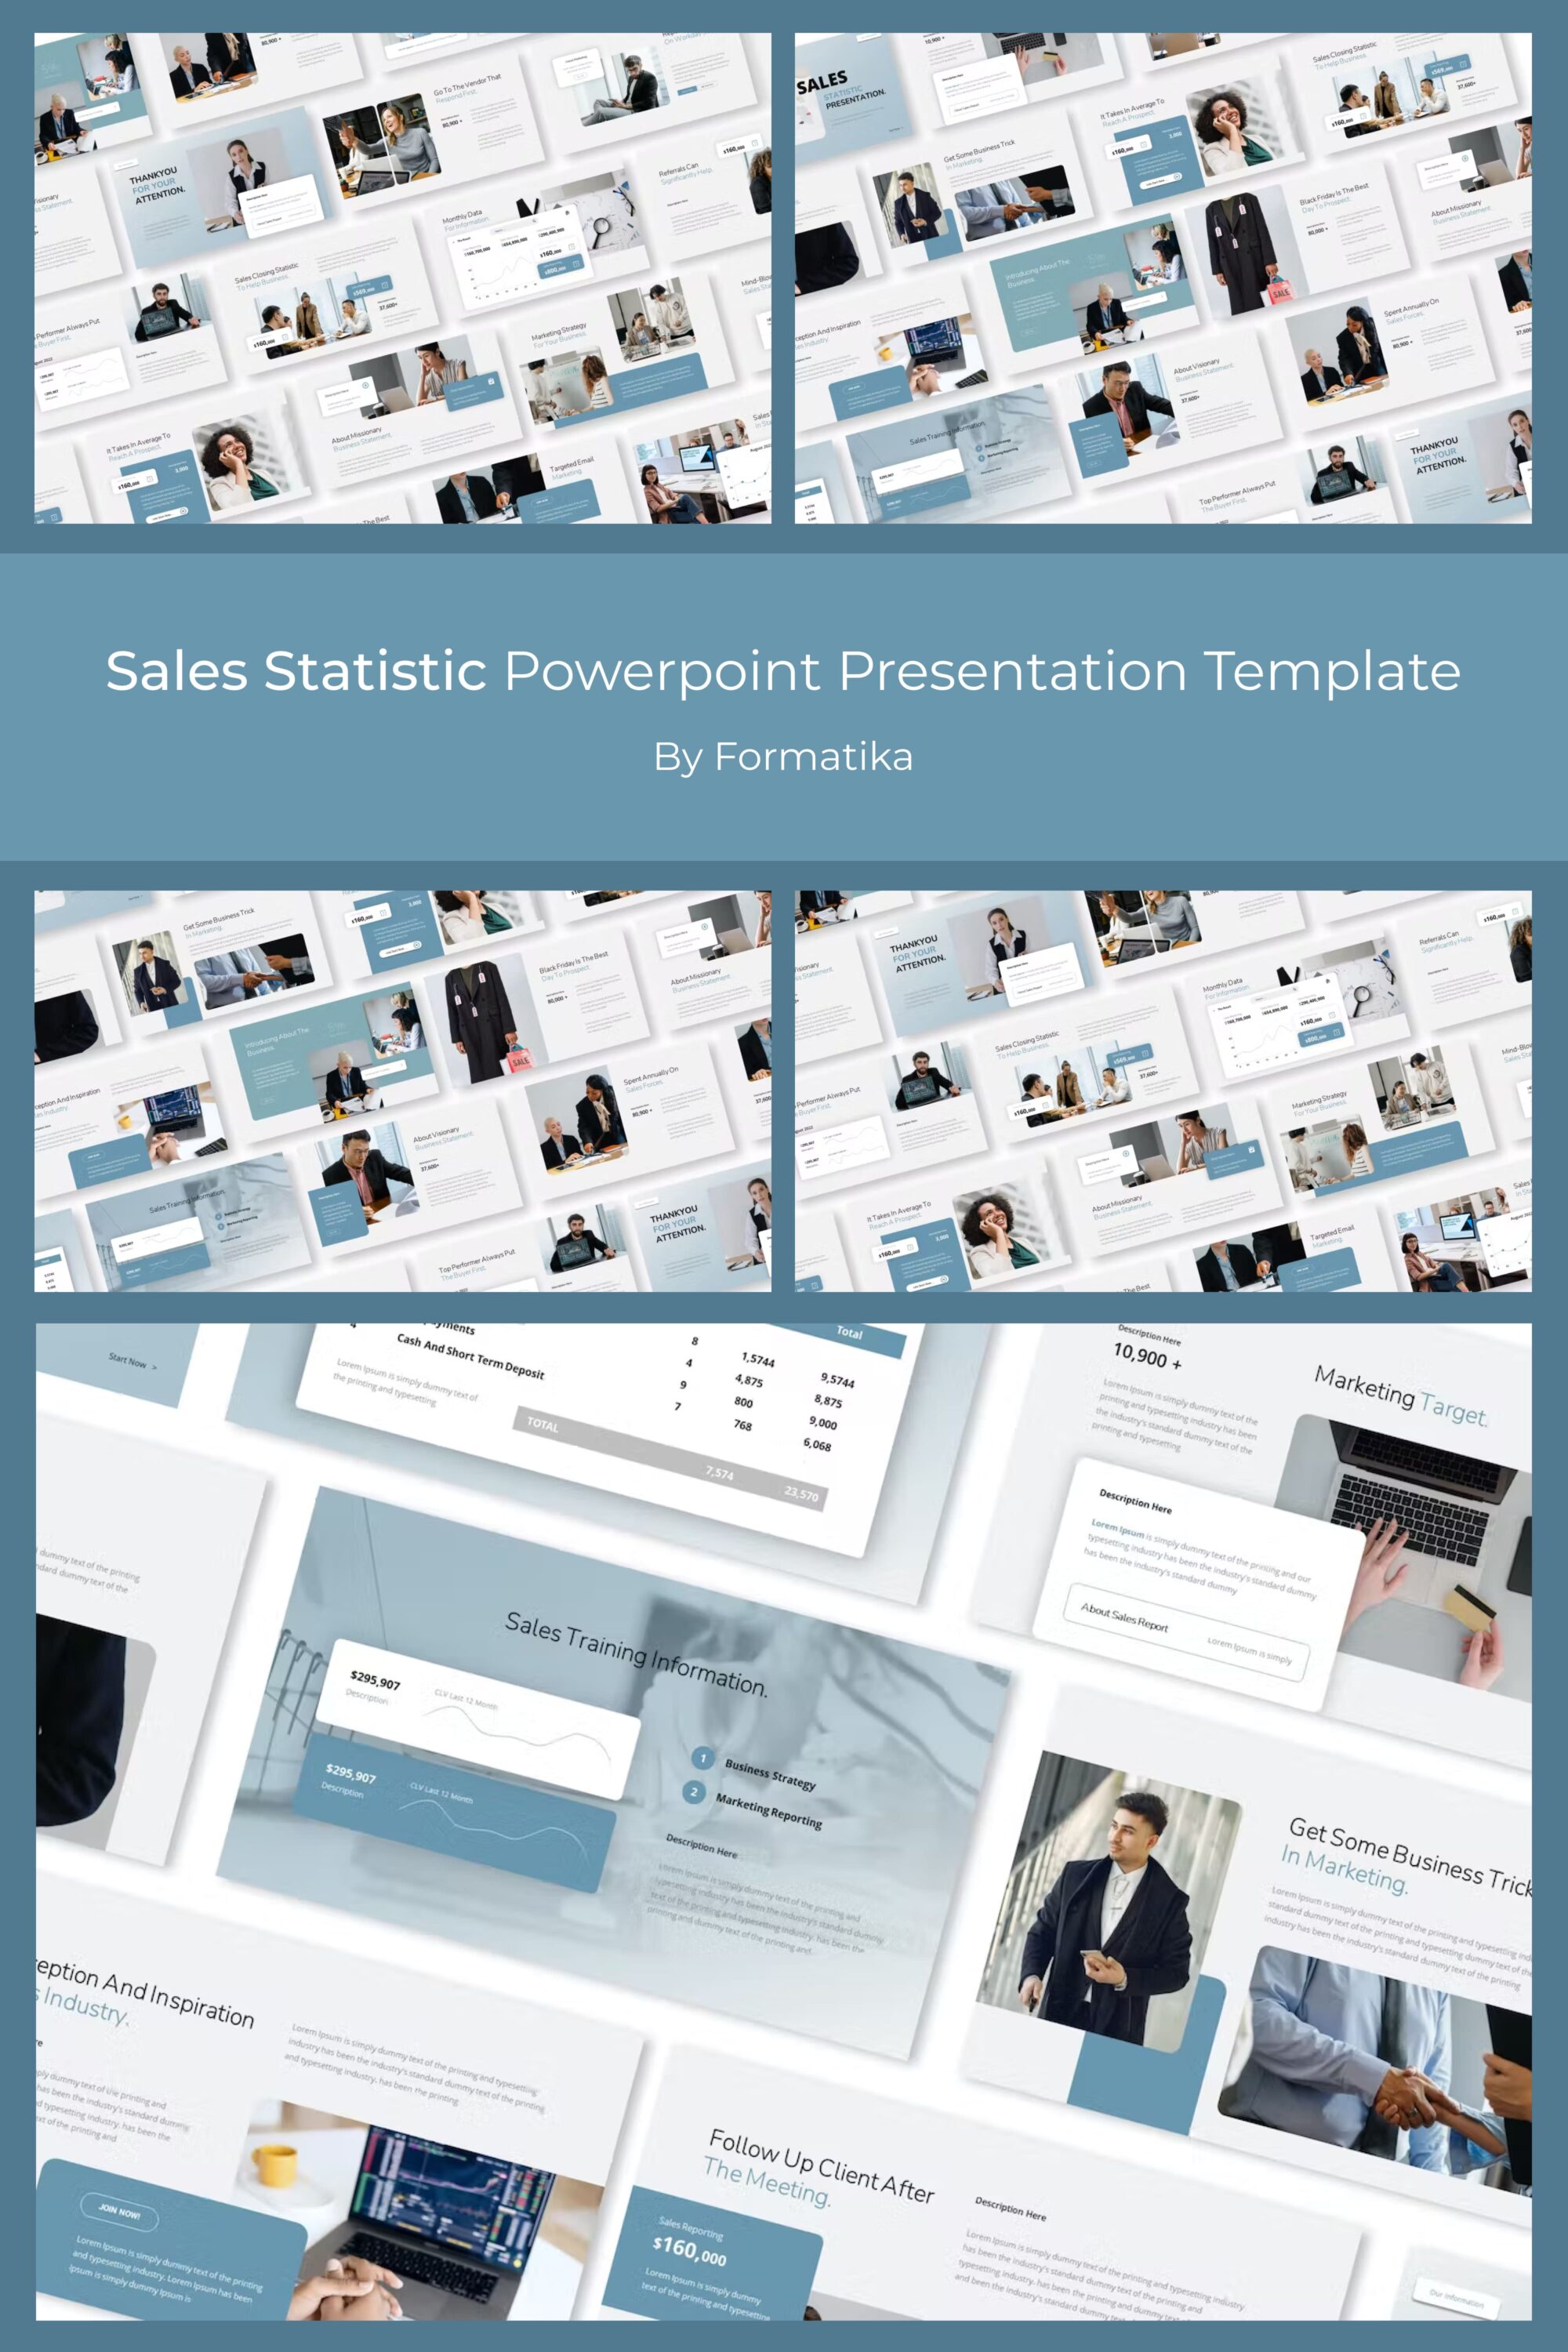 Sales Statistic Powerpoint Presentation Template - pinterest image preview.